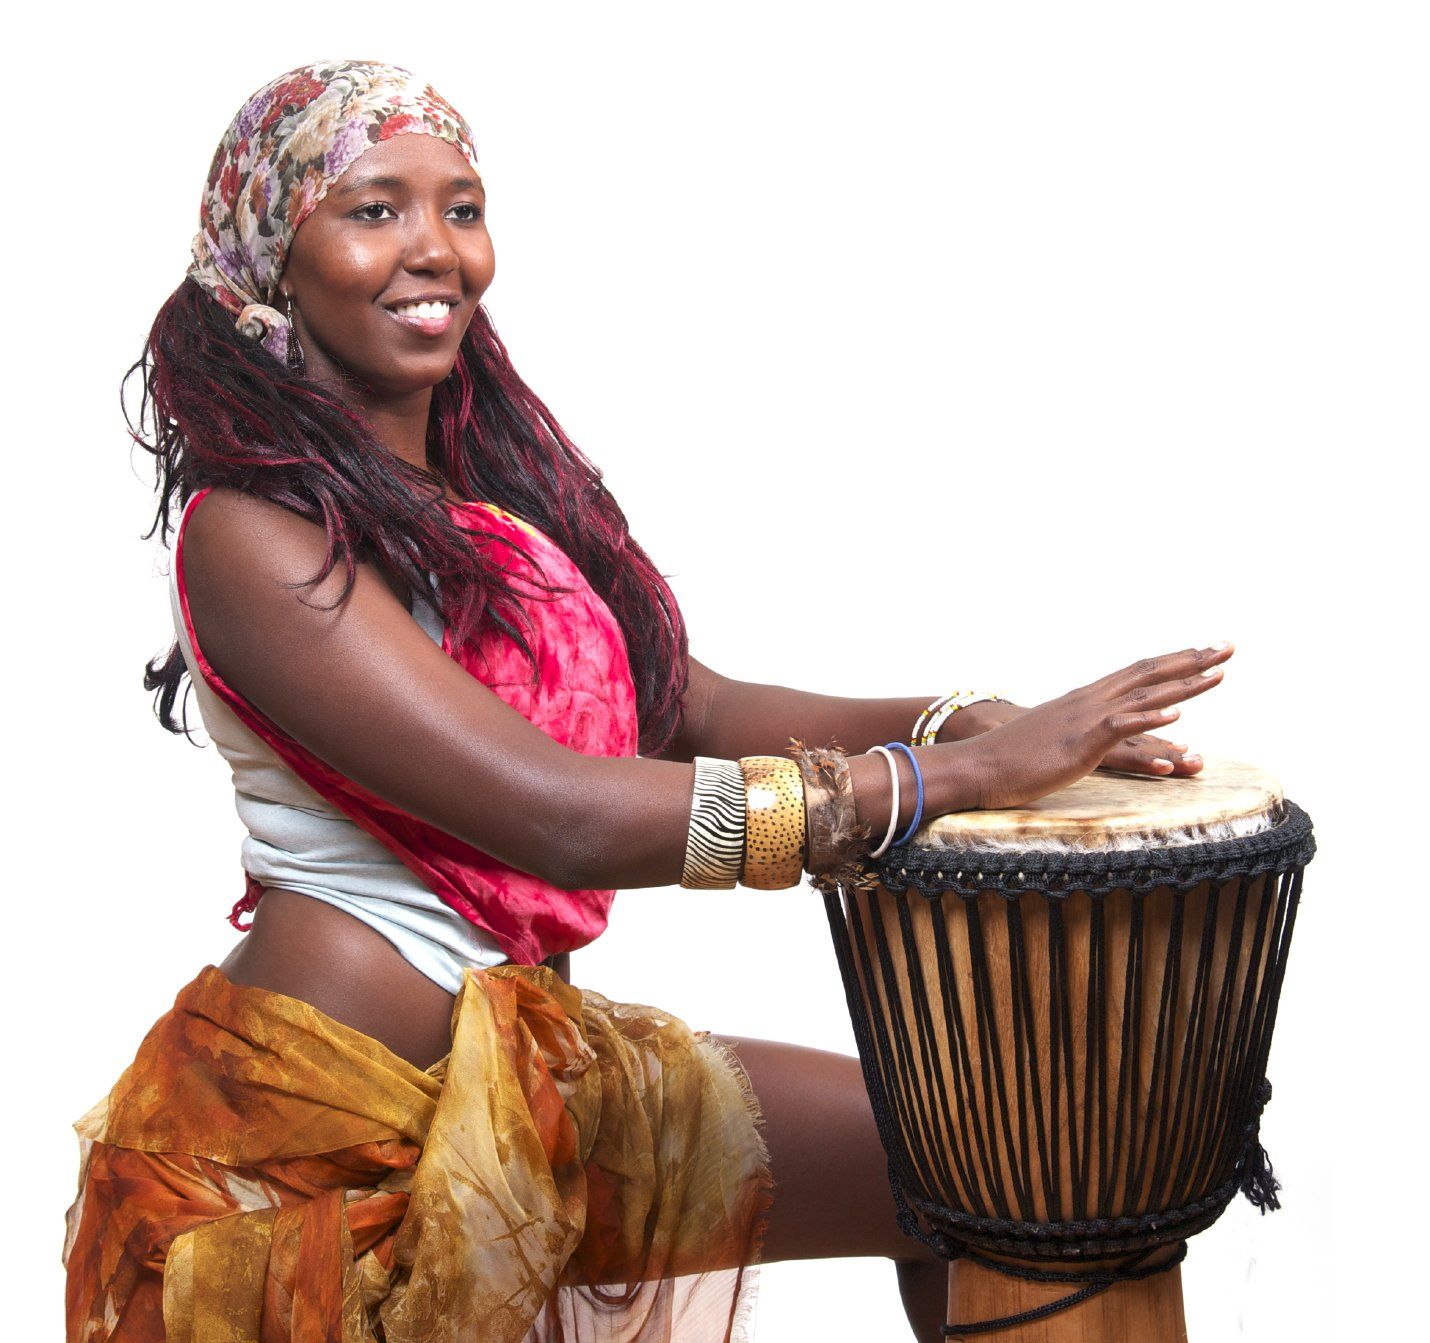 Smiling Black woman in colorful outfit, playing a single drum.